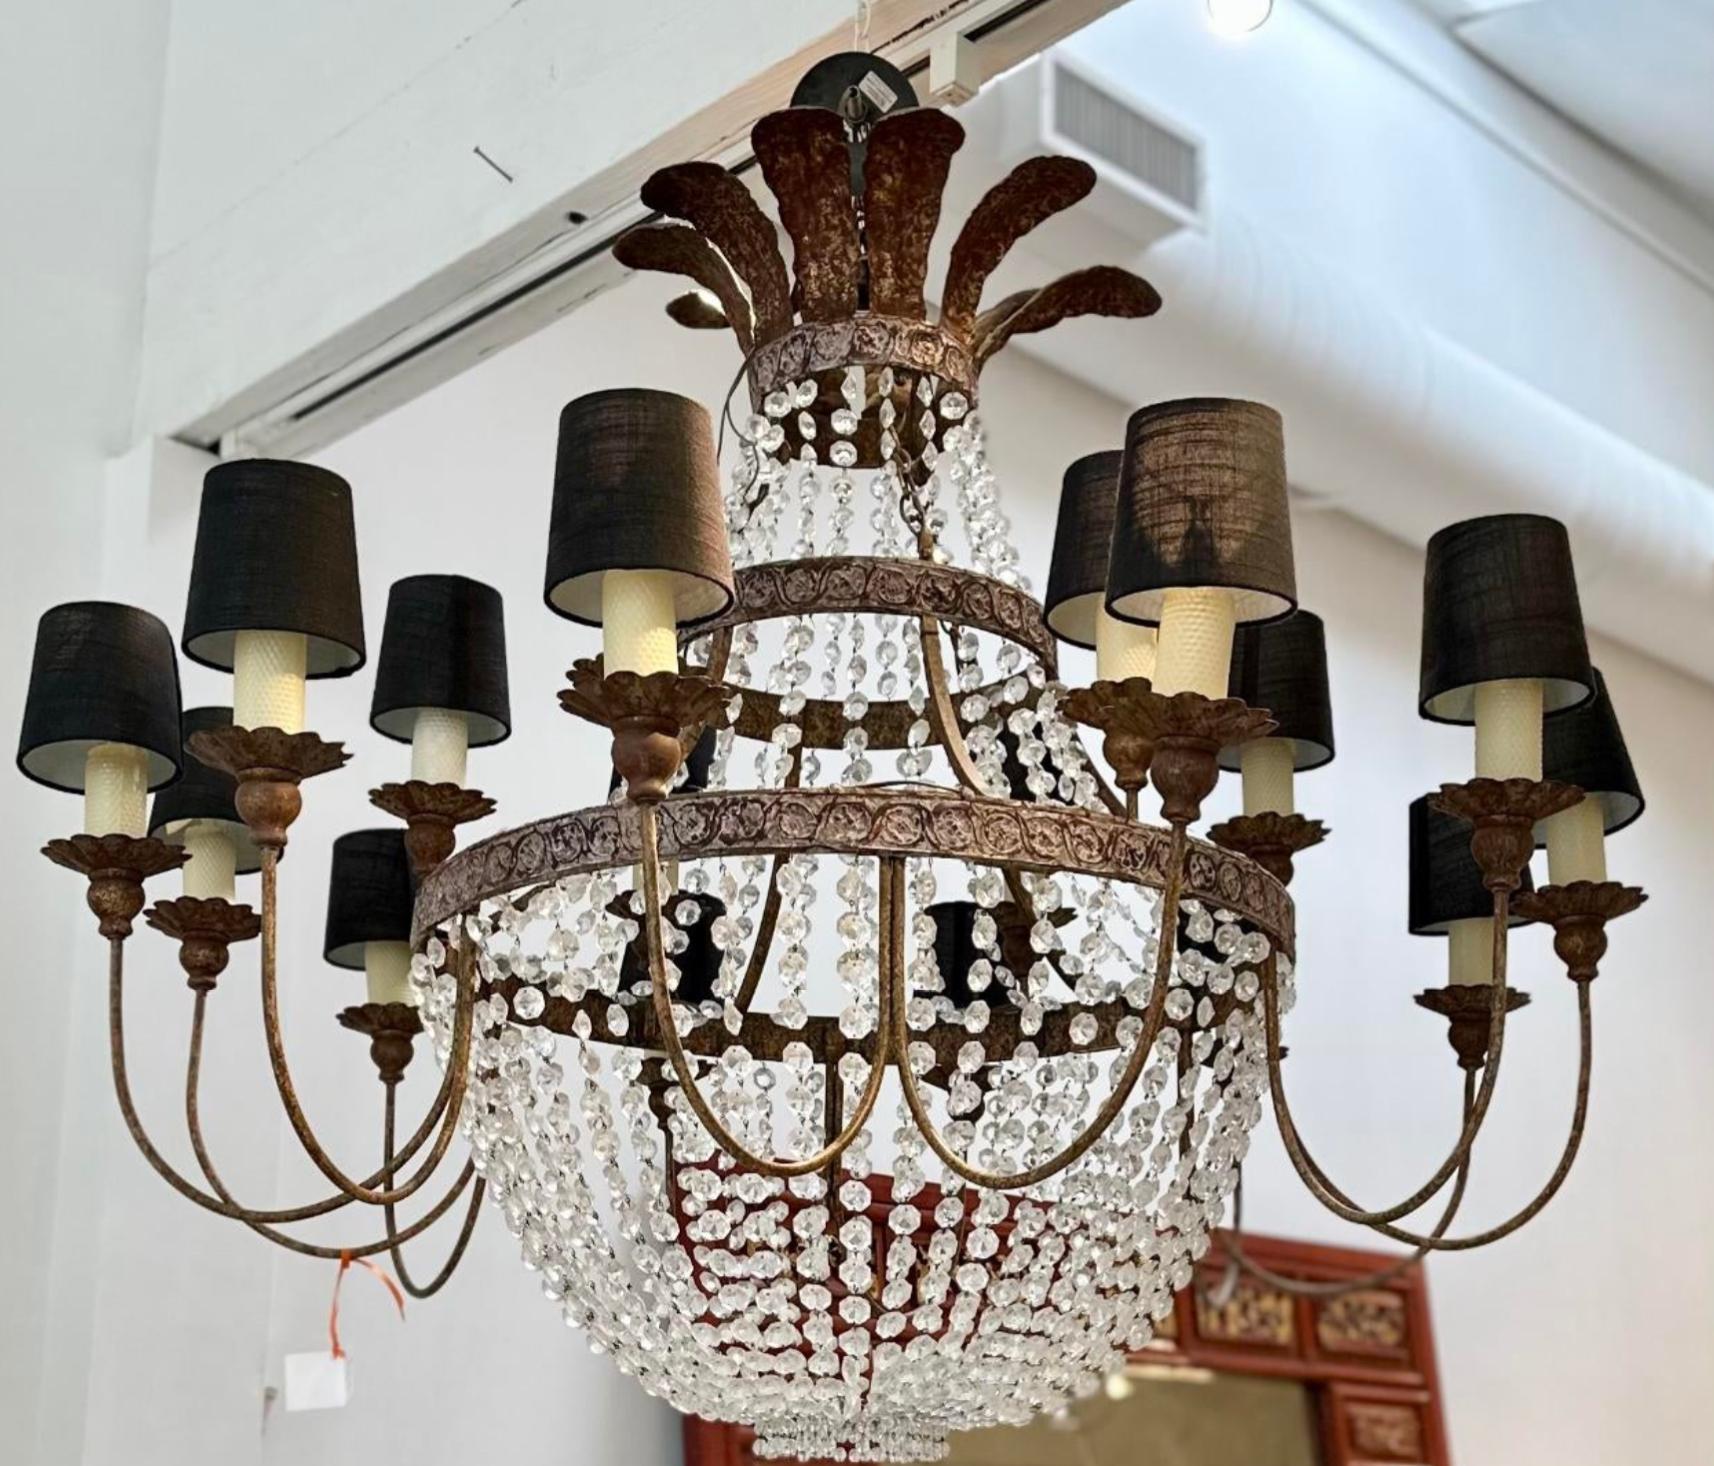 Huge Niermann Weeks Wrought Iron & Crystal Chandelier It features 18 lights and brilliant draping crystal with a classic basket form.